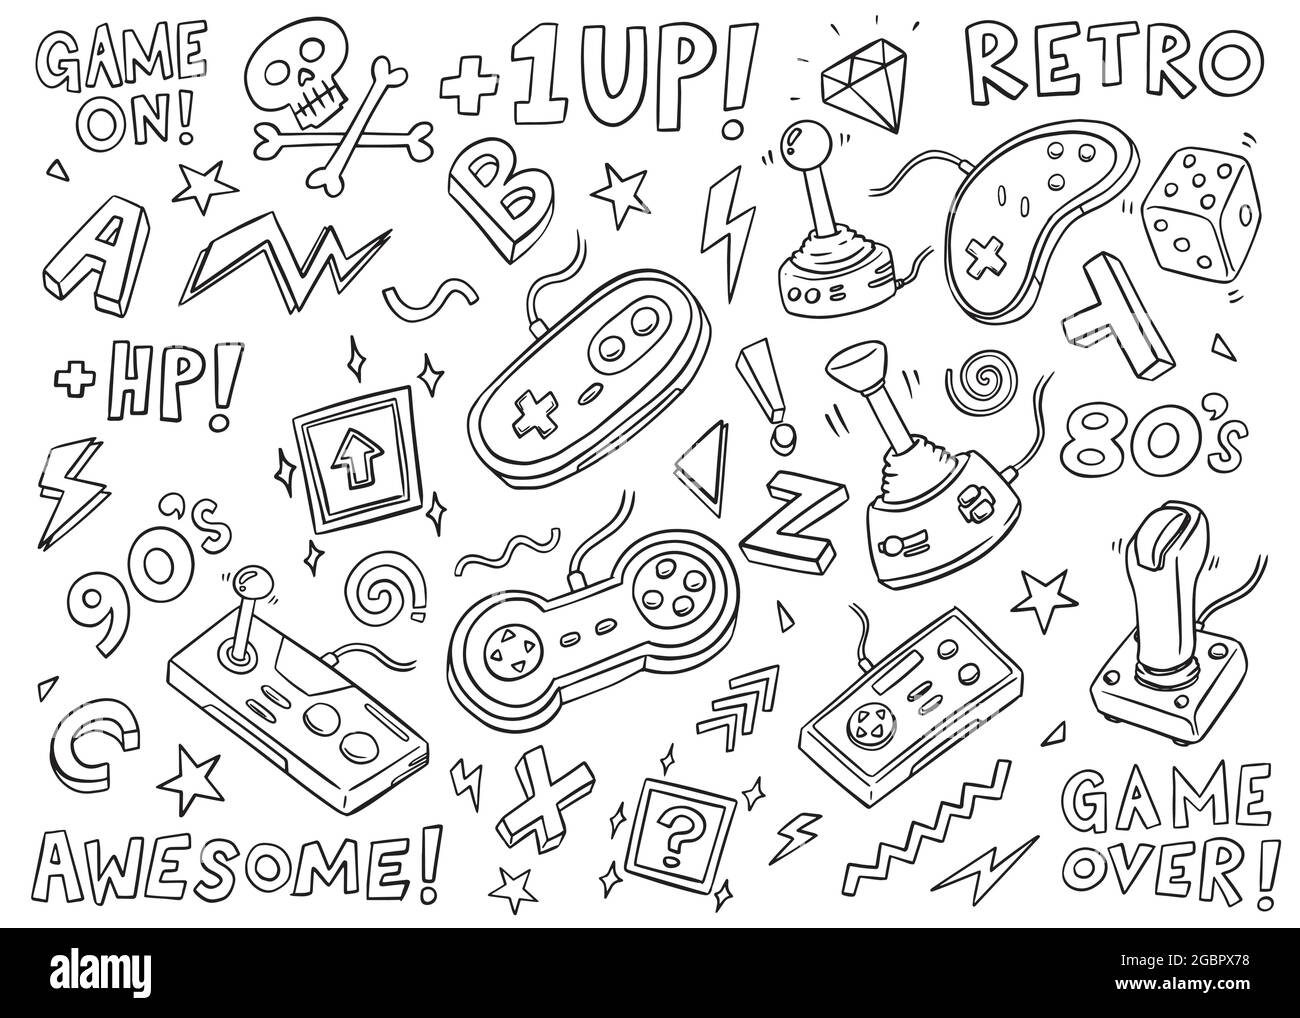 Game doodles. Hand drawing of Game. Stock Vector